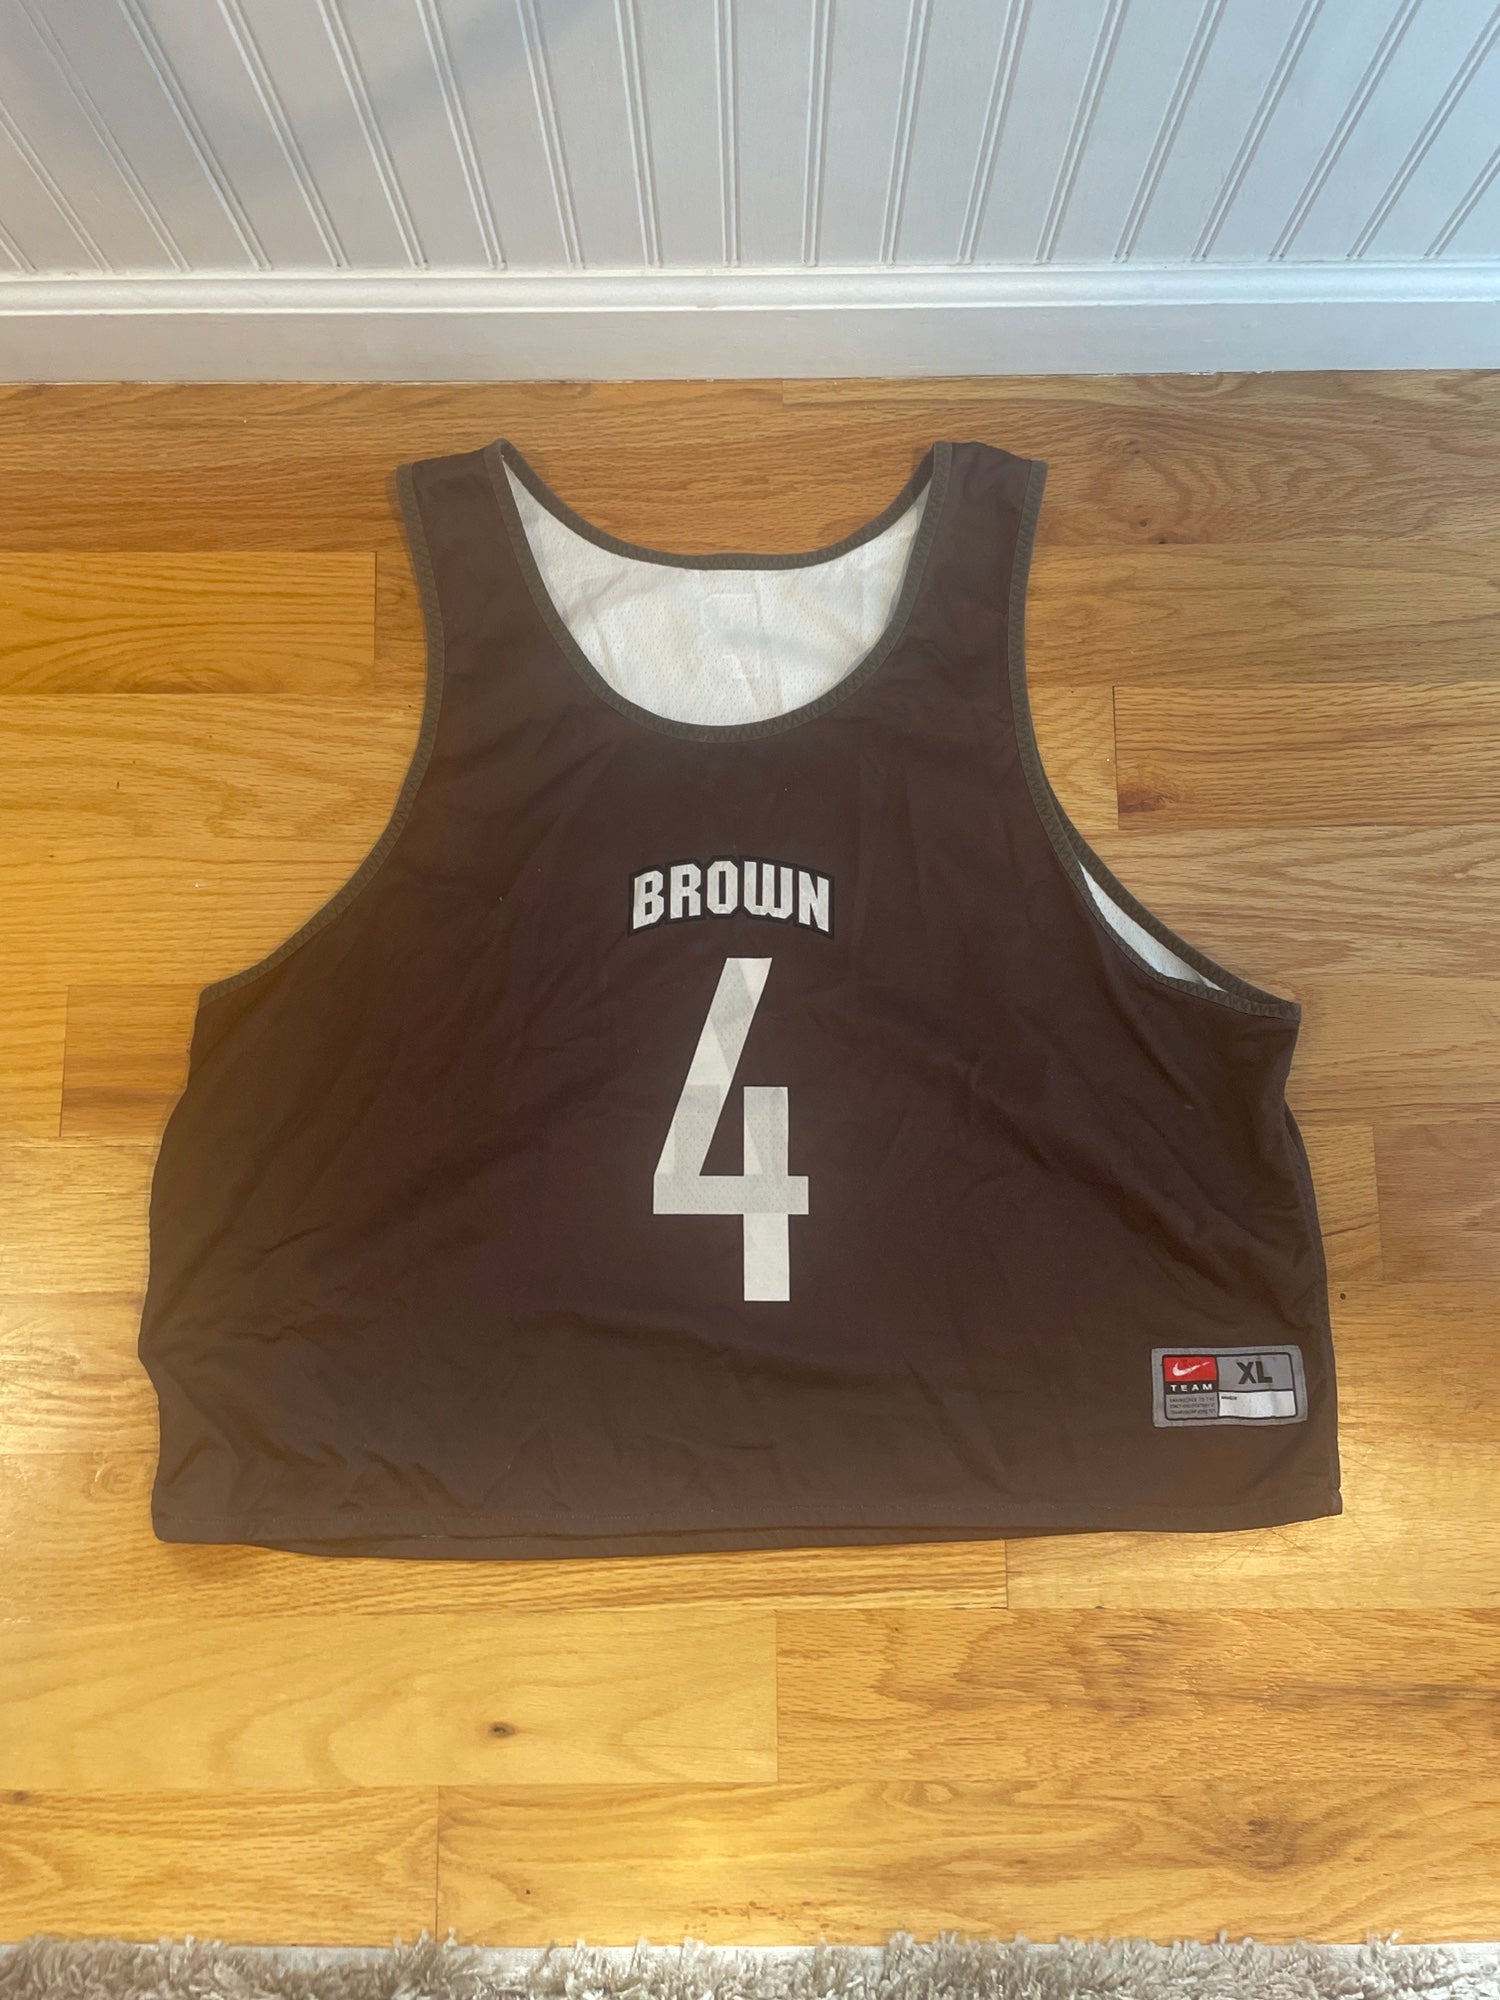 Brown NBA Jerseys for sale